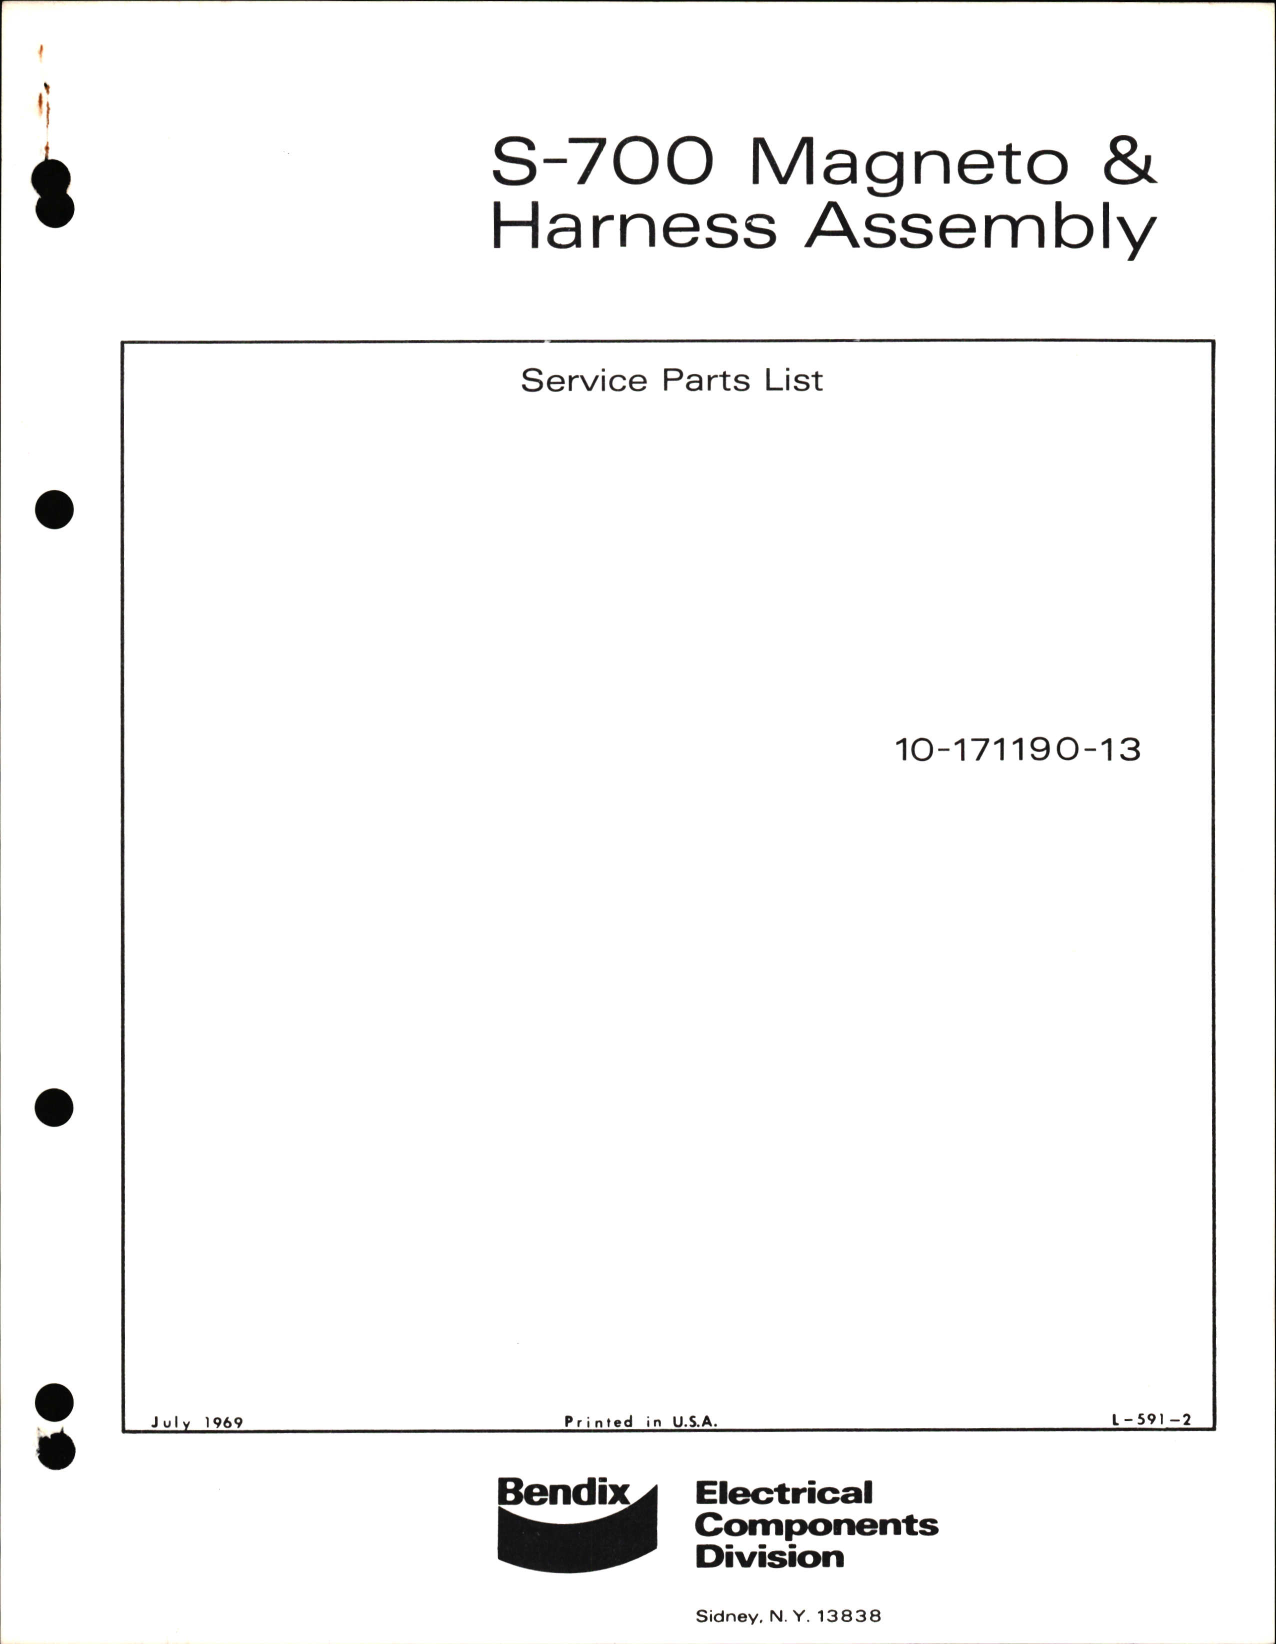 Sample page 1 from AirCorps Library document: Service Parts List for S-700 Magneto and Harness Assembly